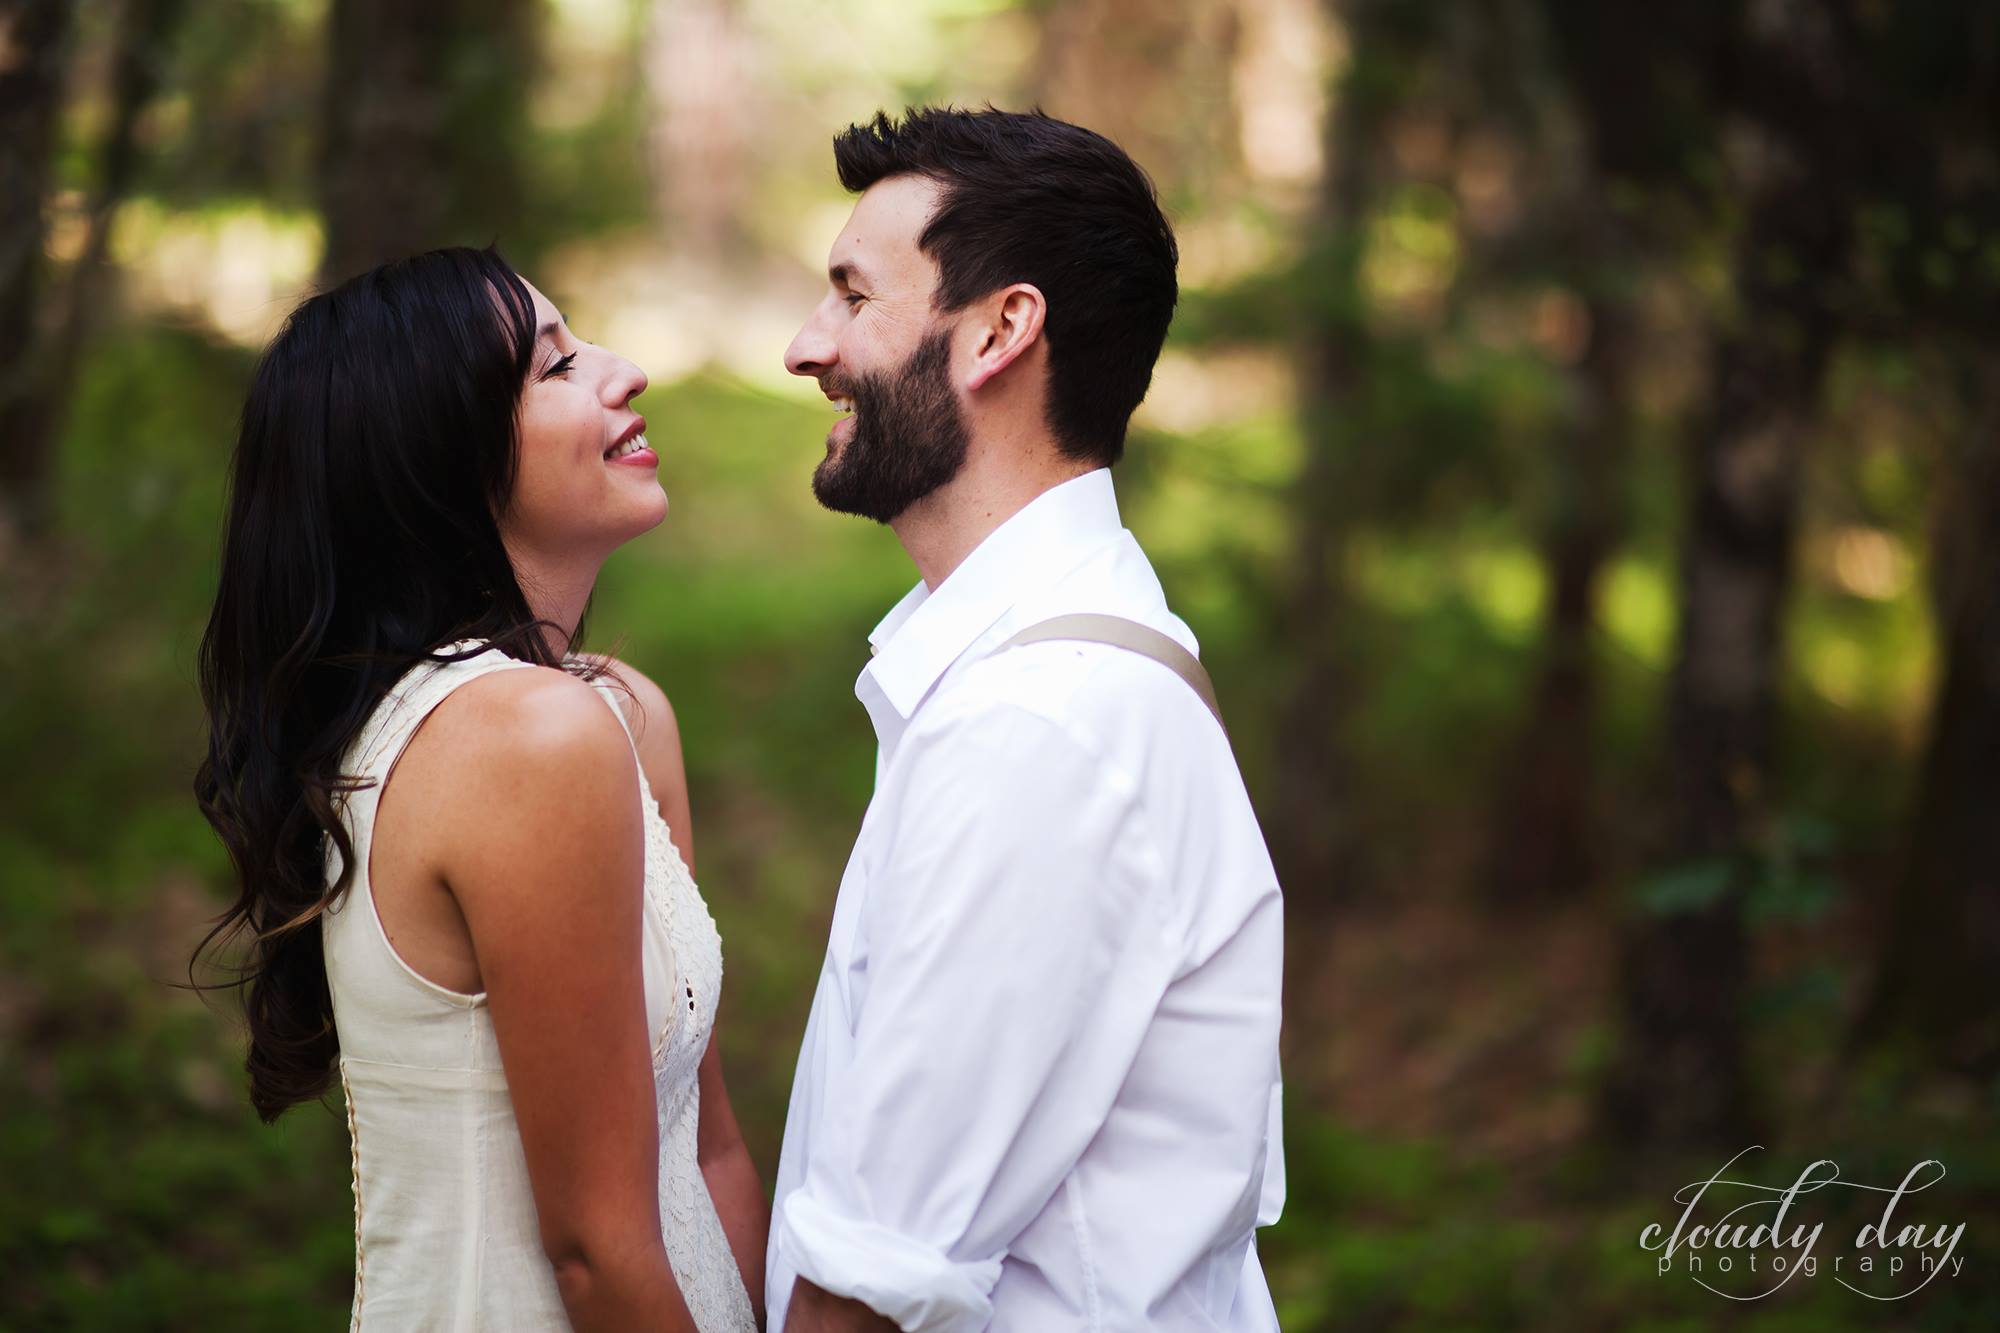 A light-filled spring engagement photography session